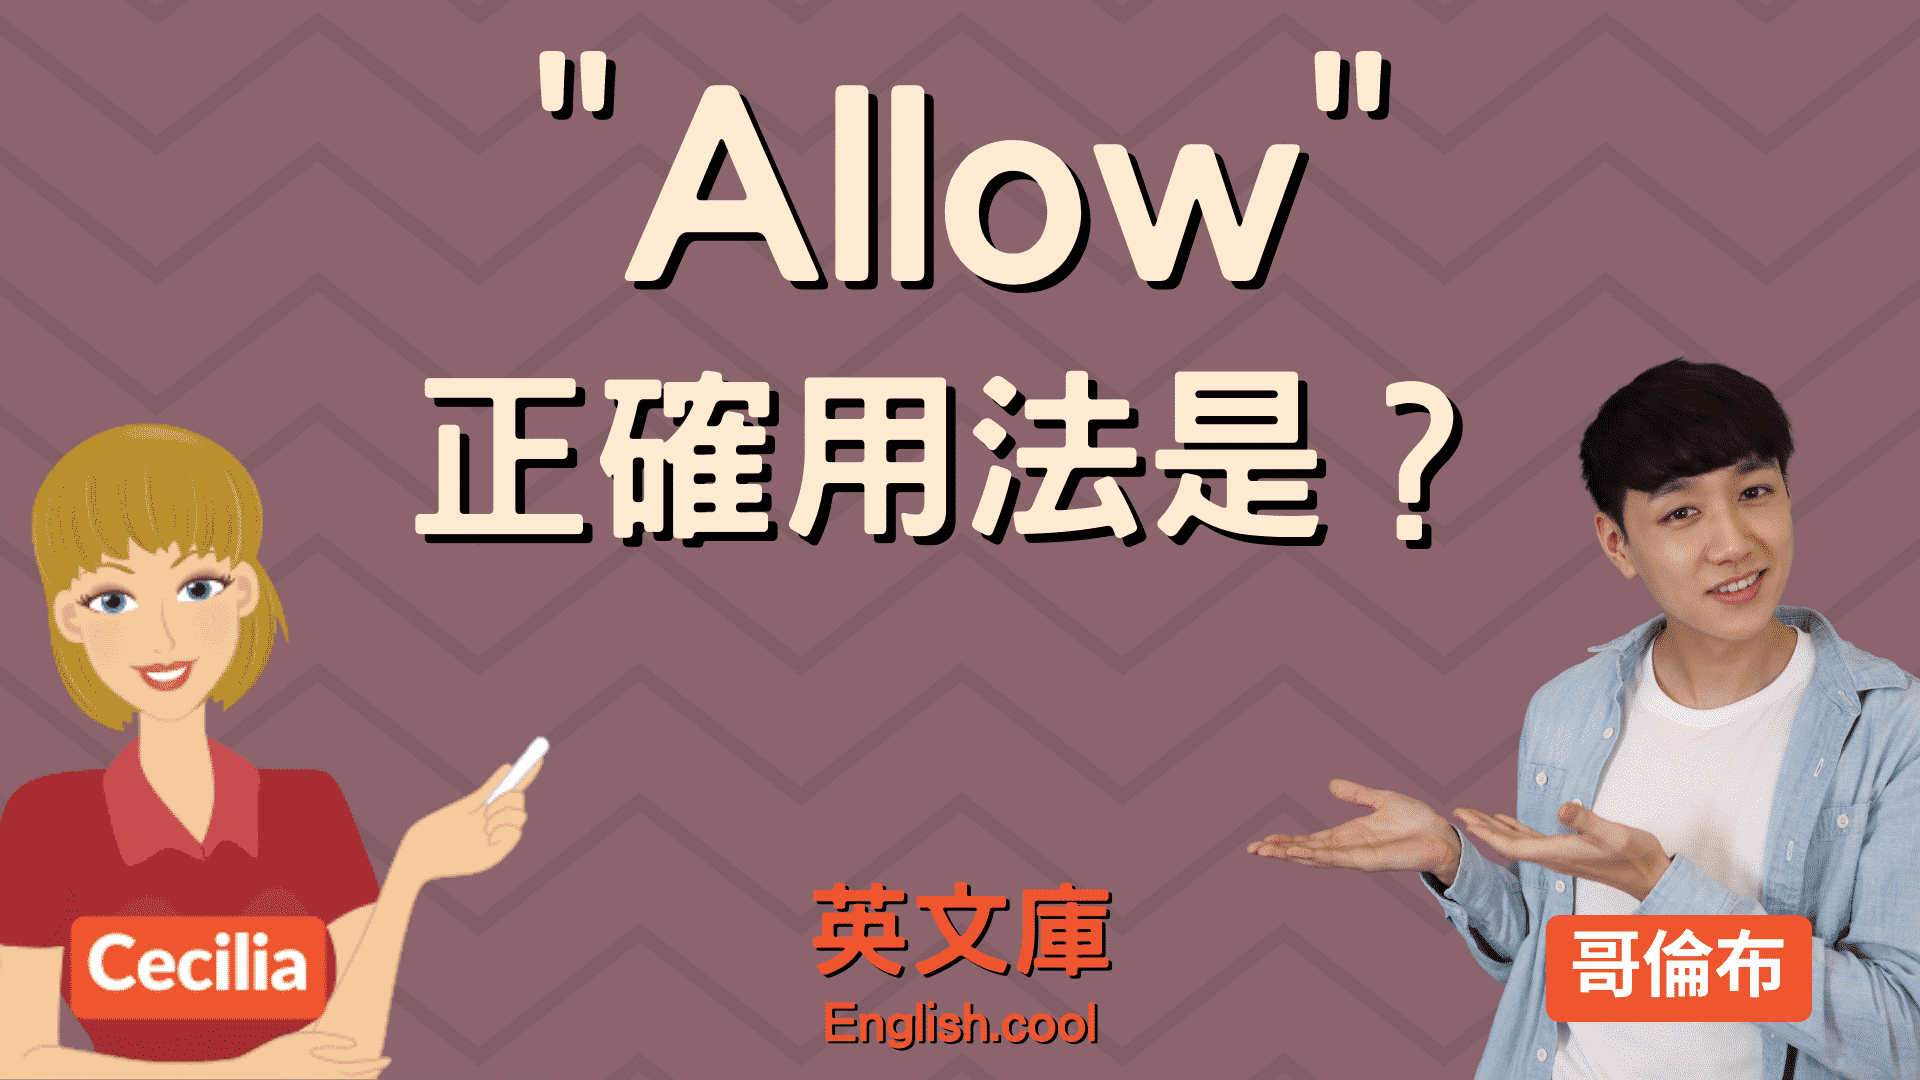 You are currently viewing 「allow」正確用法是？來看例句一次搞懂！